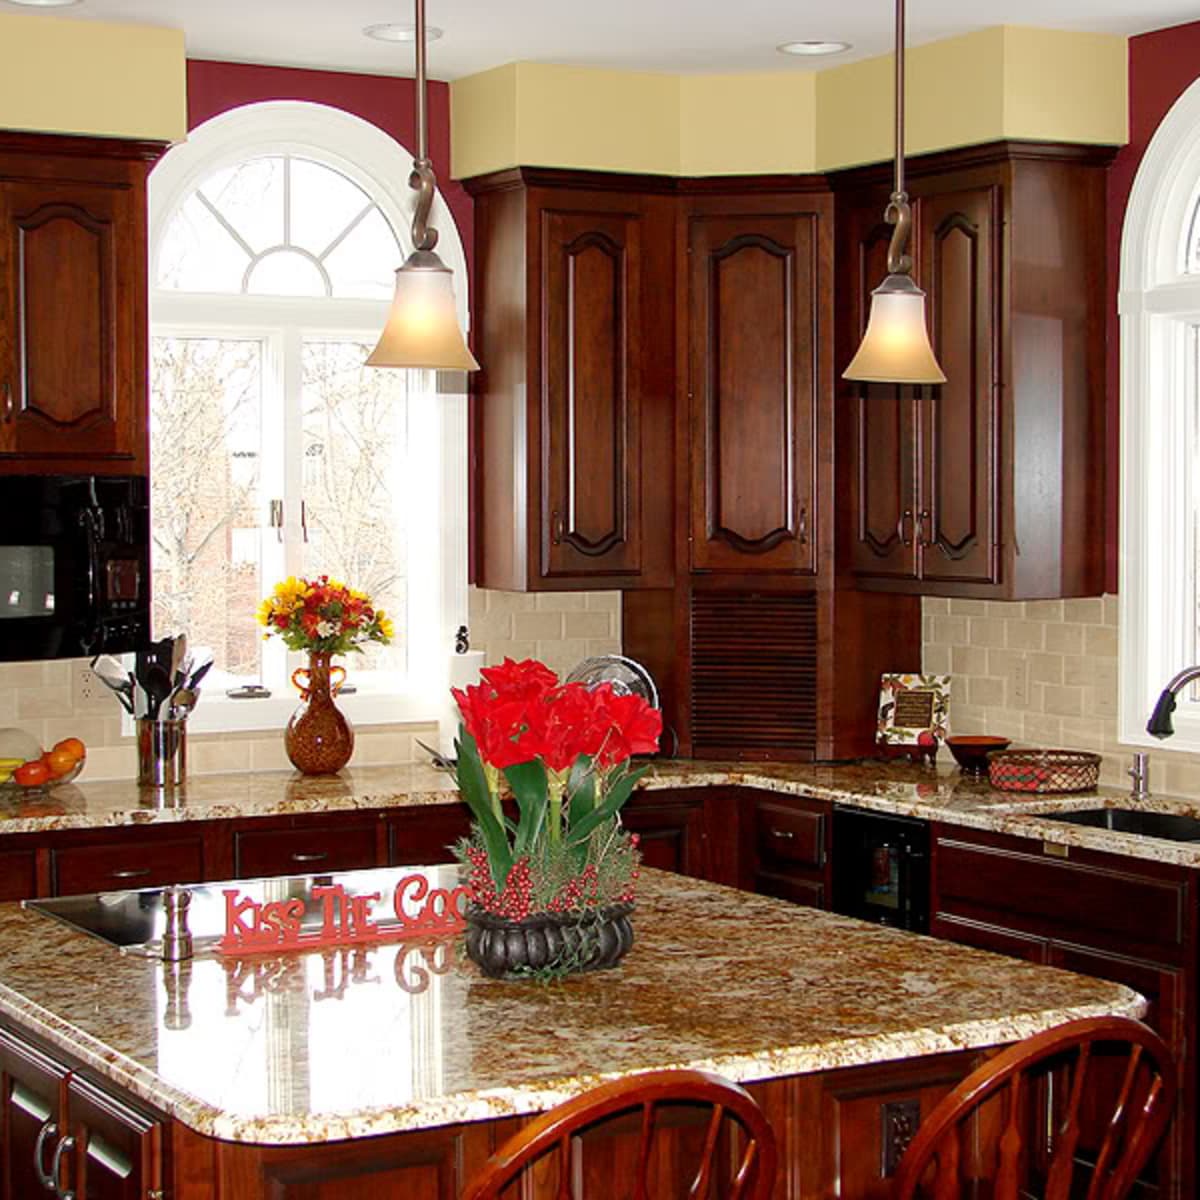 Update Your Kitchen on a Budget | Decorating above kitchen cabinets, Above  kitchen cabinets, Kitchen cabinet design